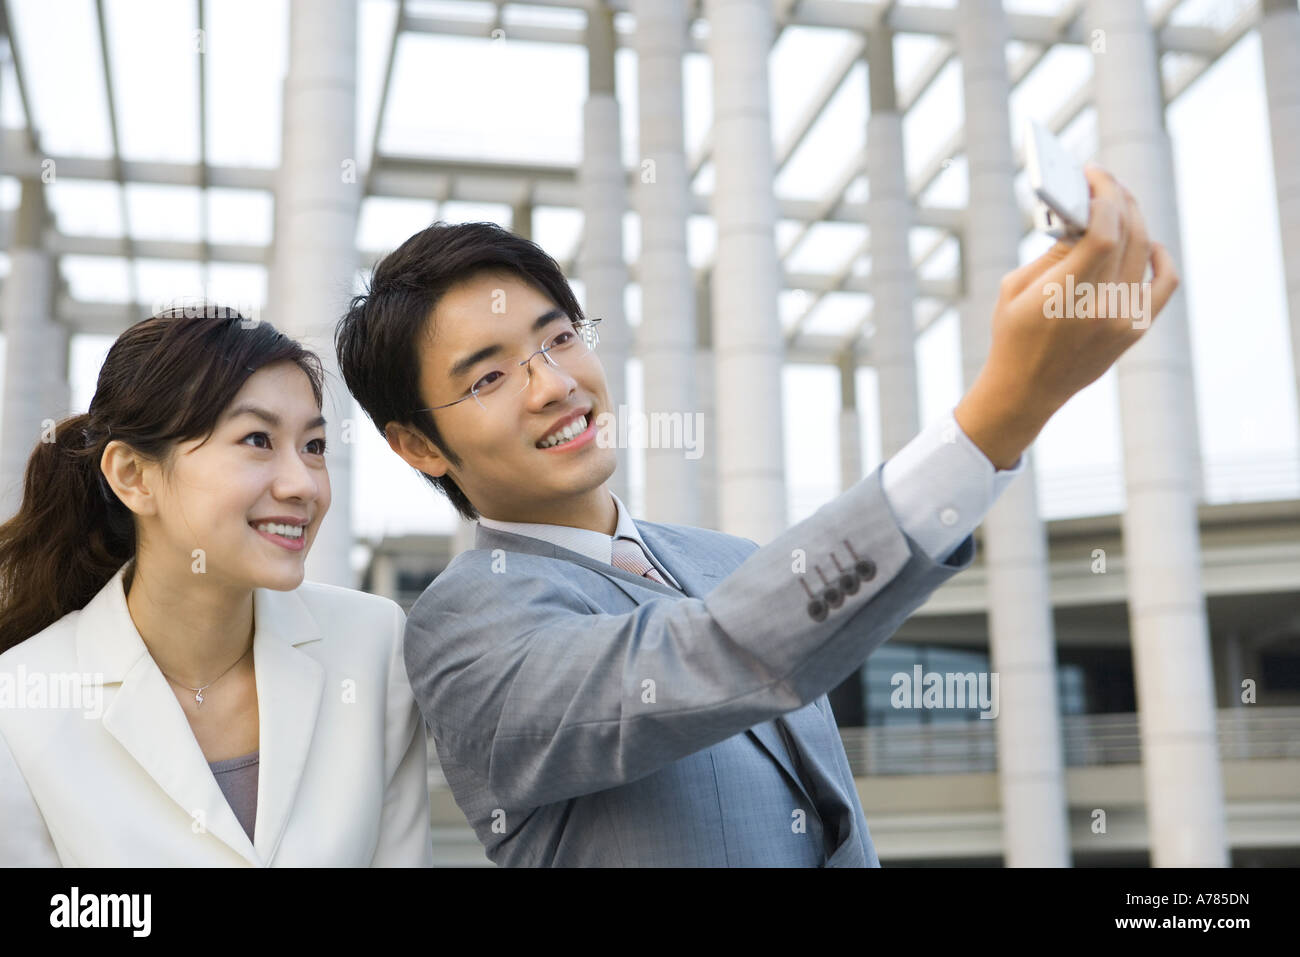 Businessman standing next to female colleague, taking photo with cell phone Stock Photo